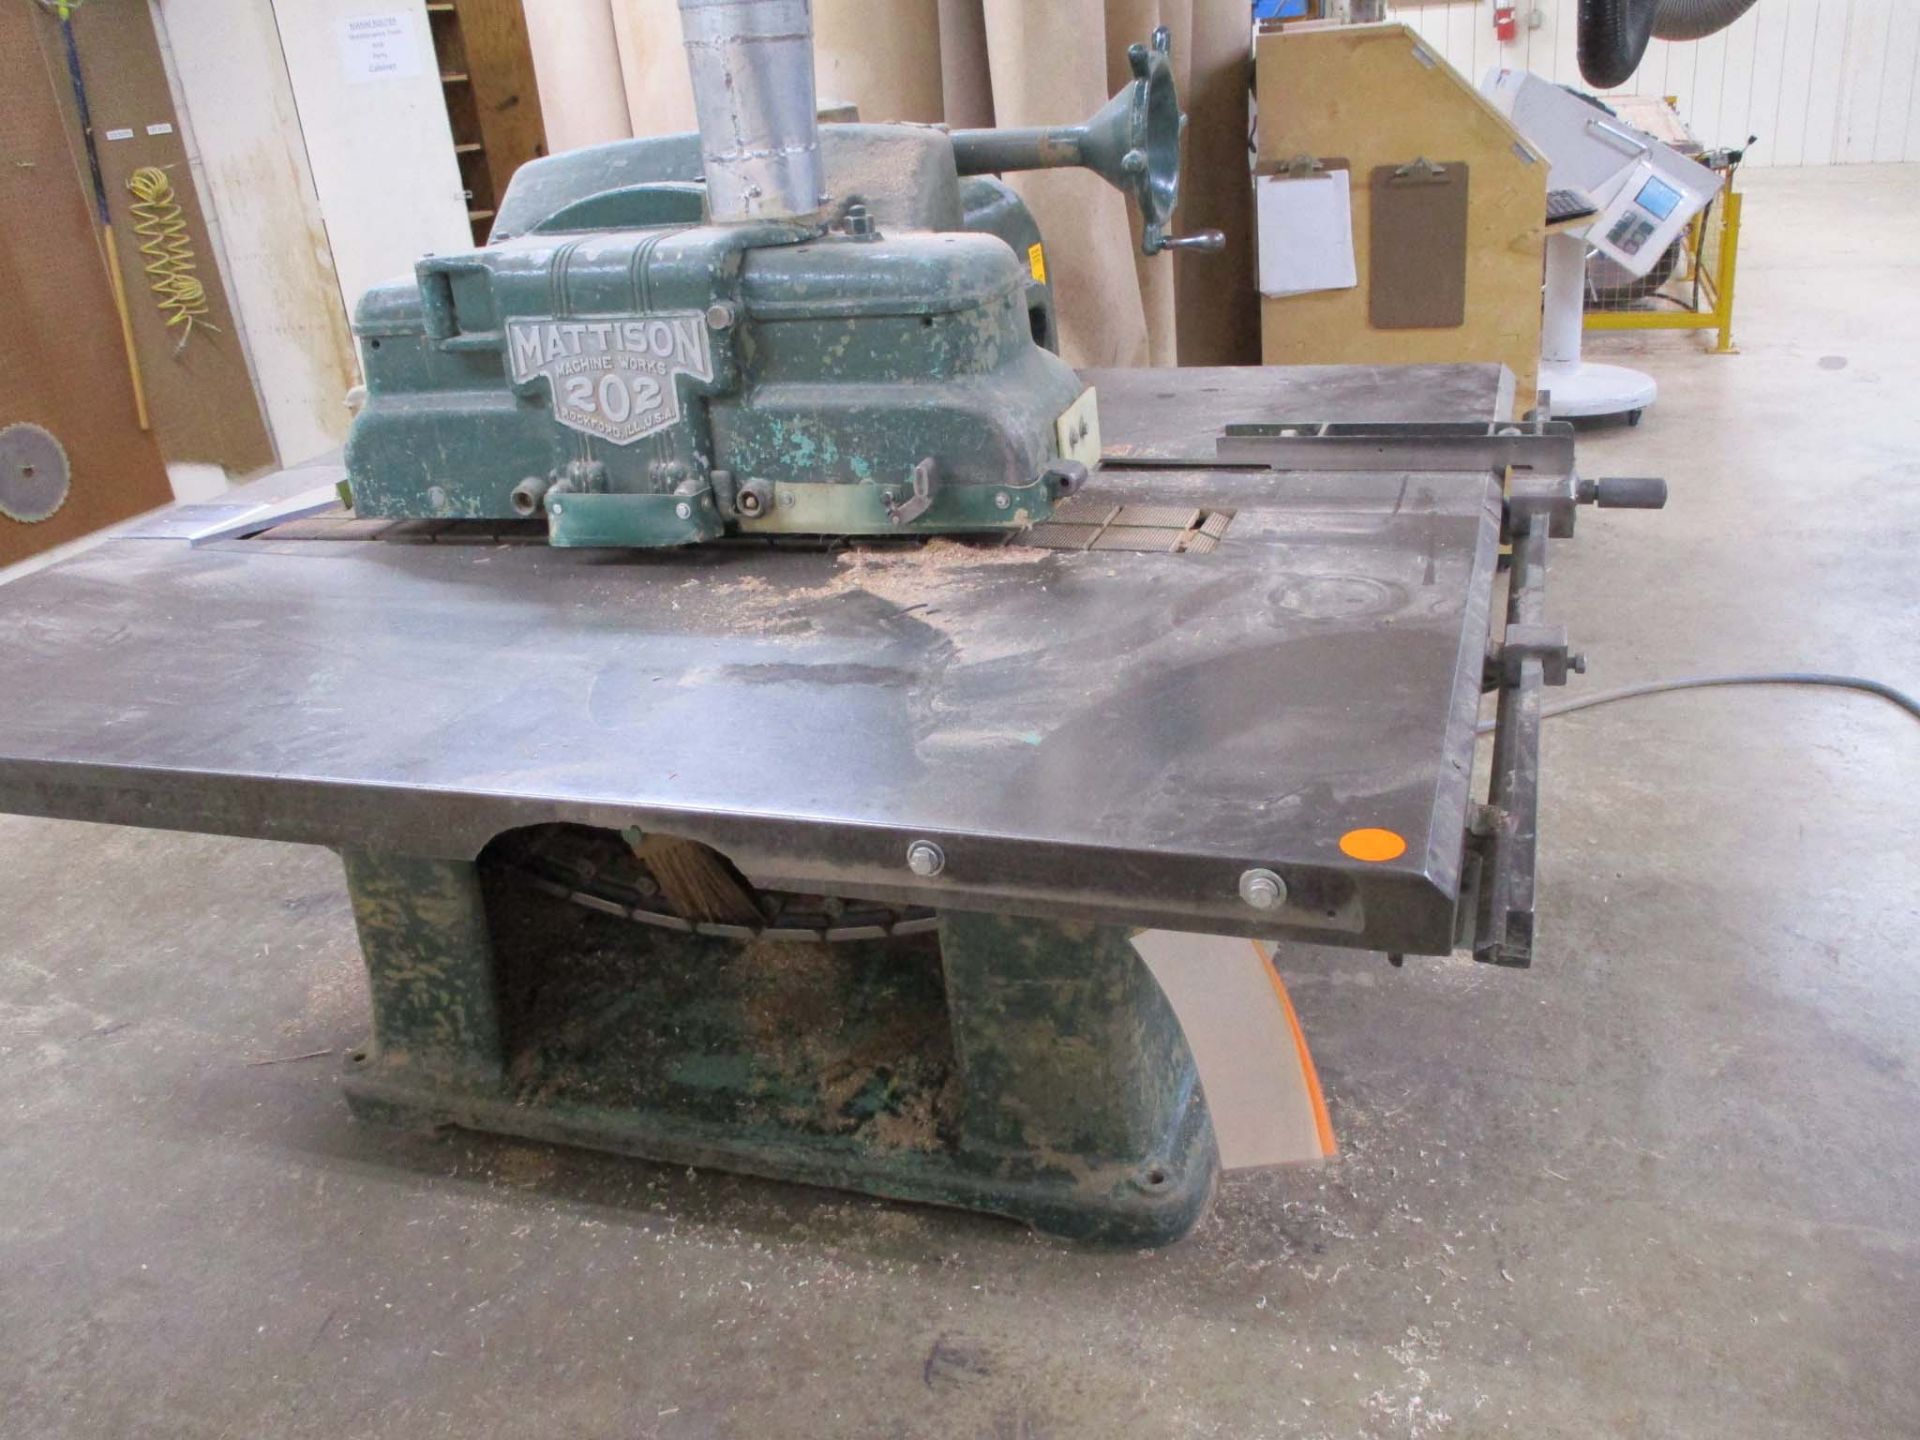 Industrial RIP SAW - Mattison 202. Fast Feed - 14" Straight Line - Image 3 of 6